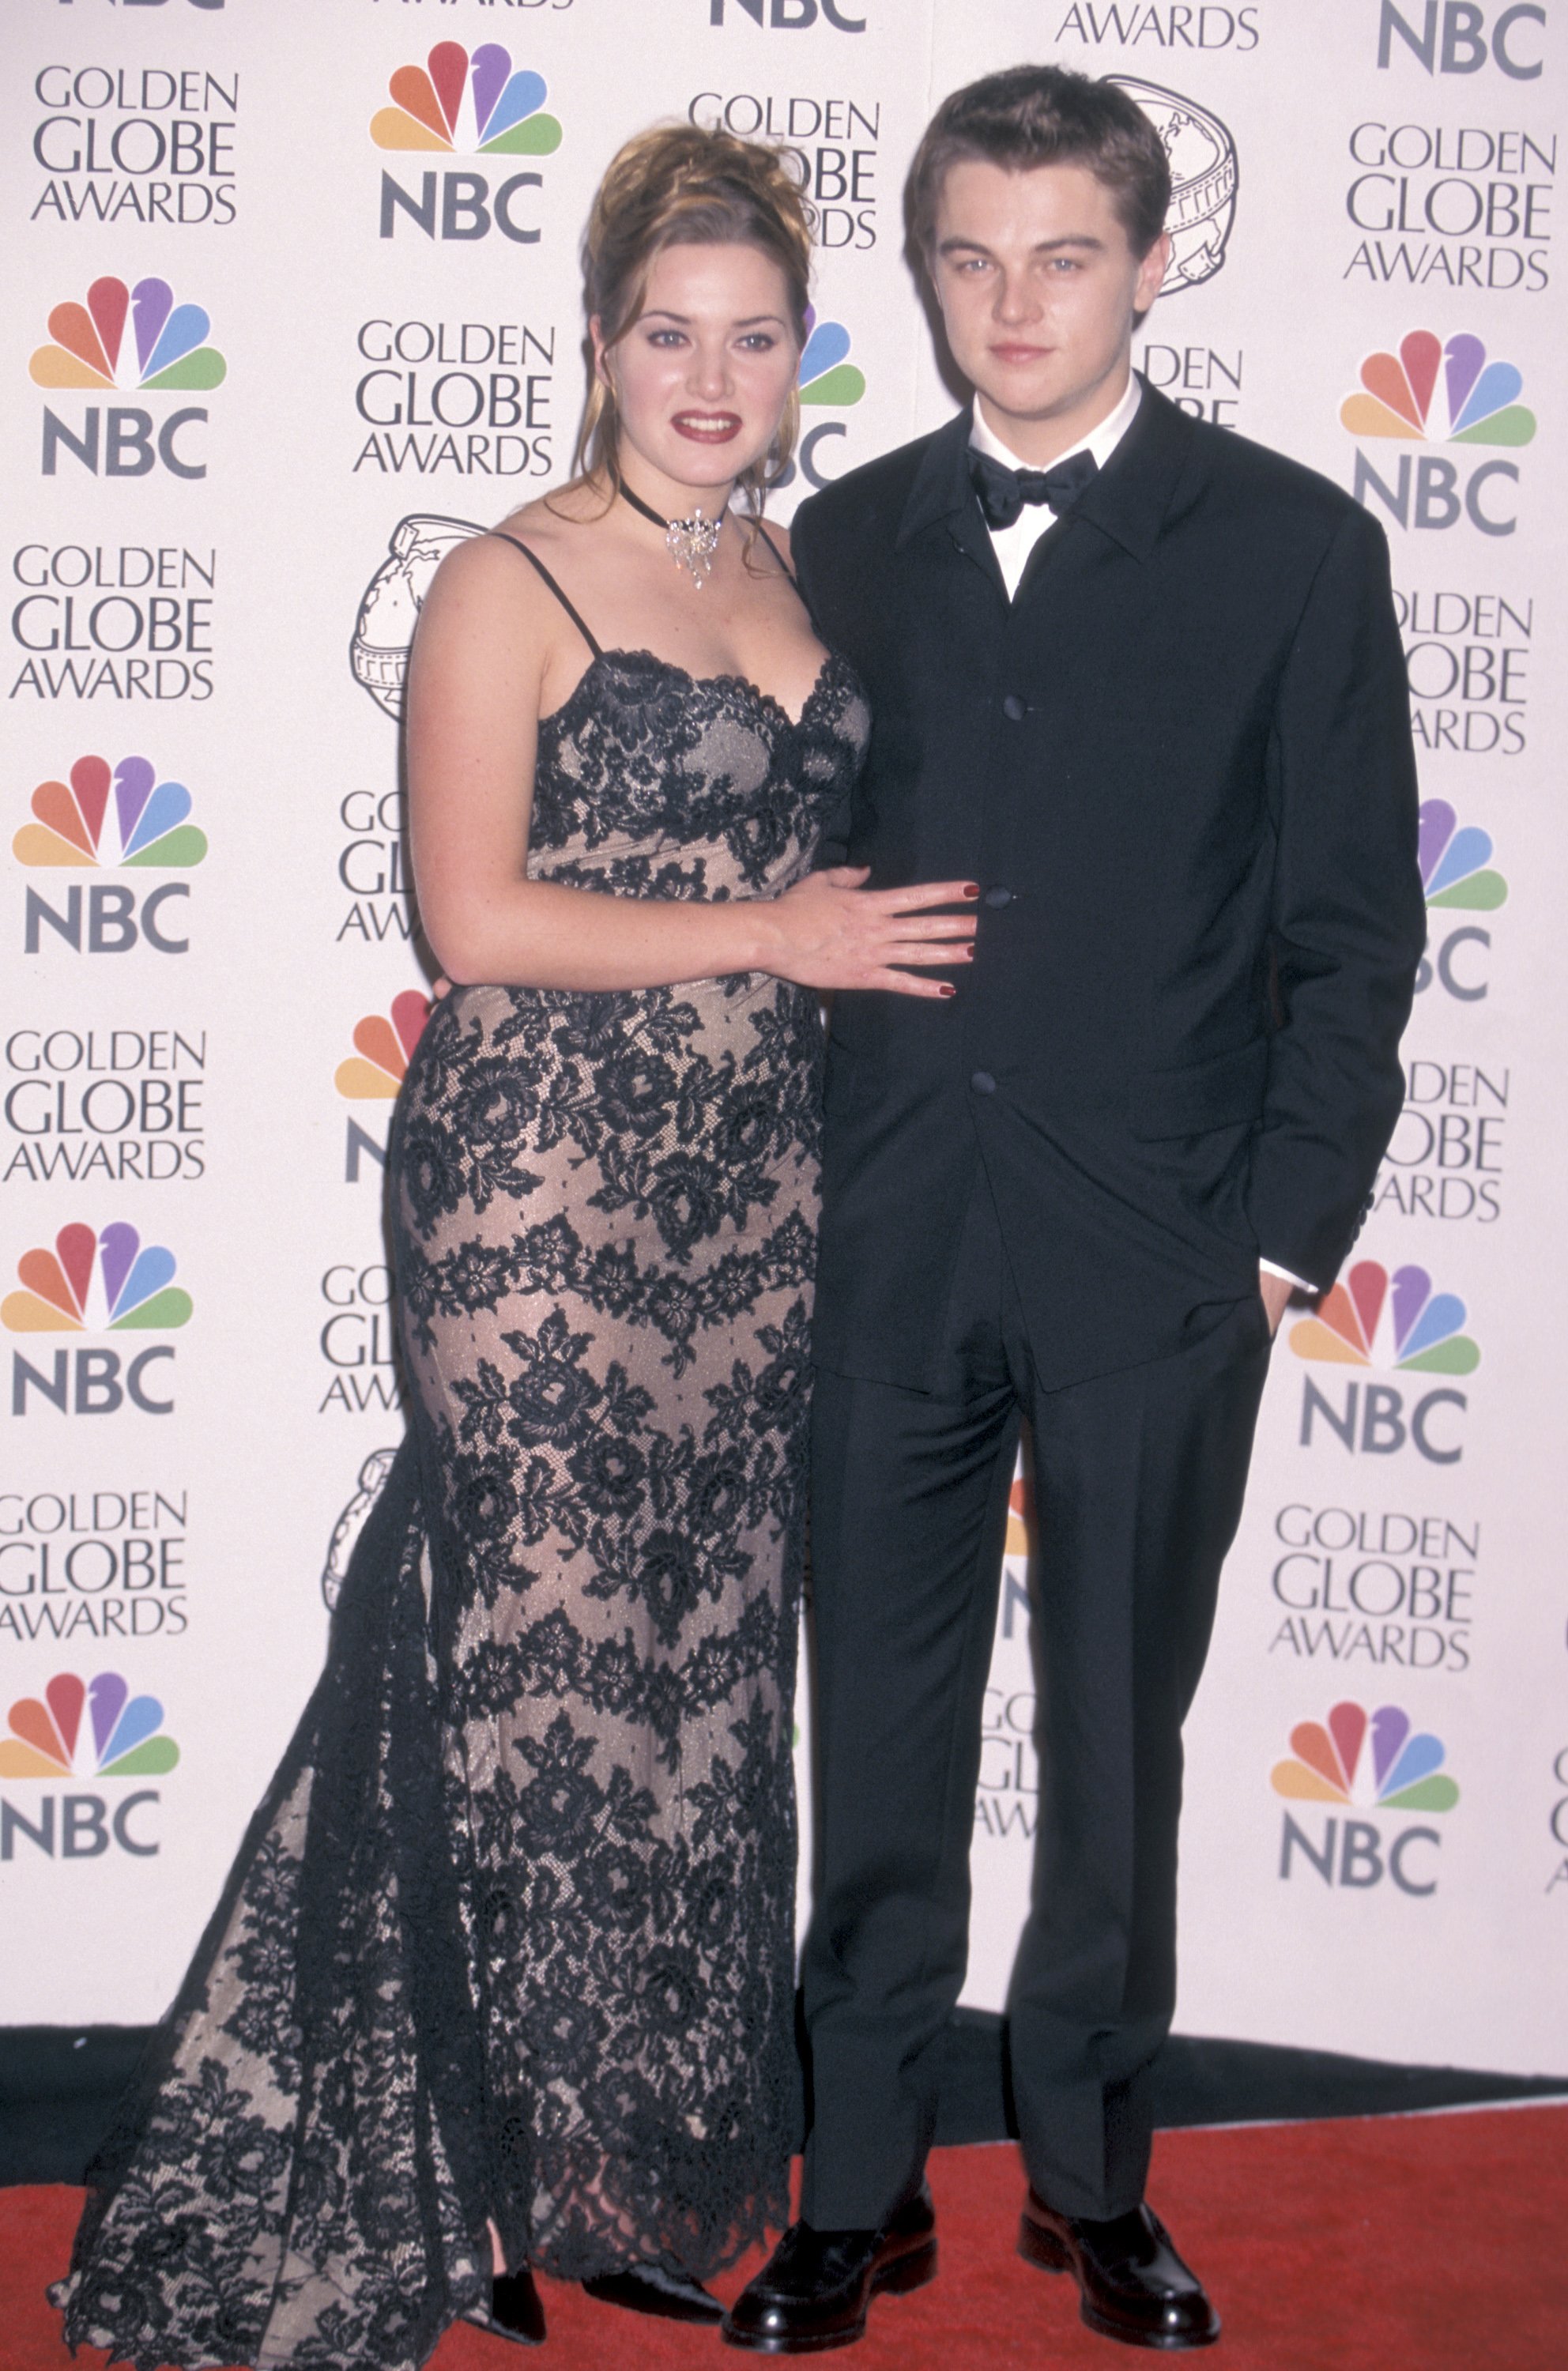 Kate Winslet And Leonardo DiCaprio during 55th Annual Golden Globe Awards on January 18, 1998 at Beverly Hilton Hotel in Beverly Hills, California | Source: Getty Images